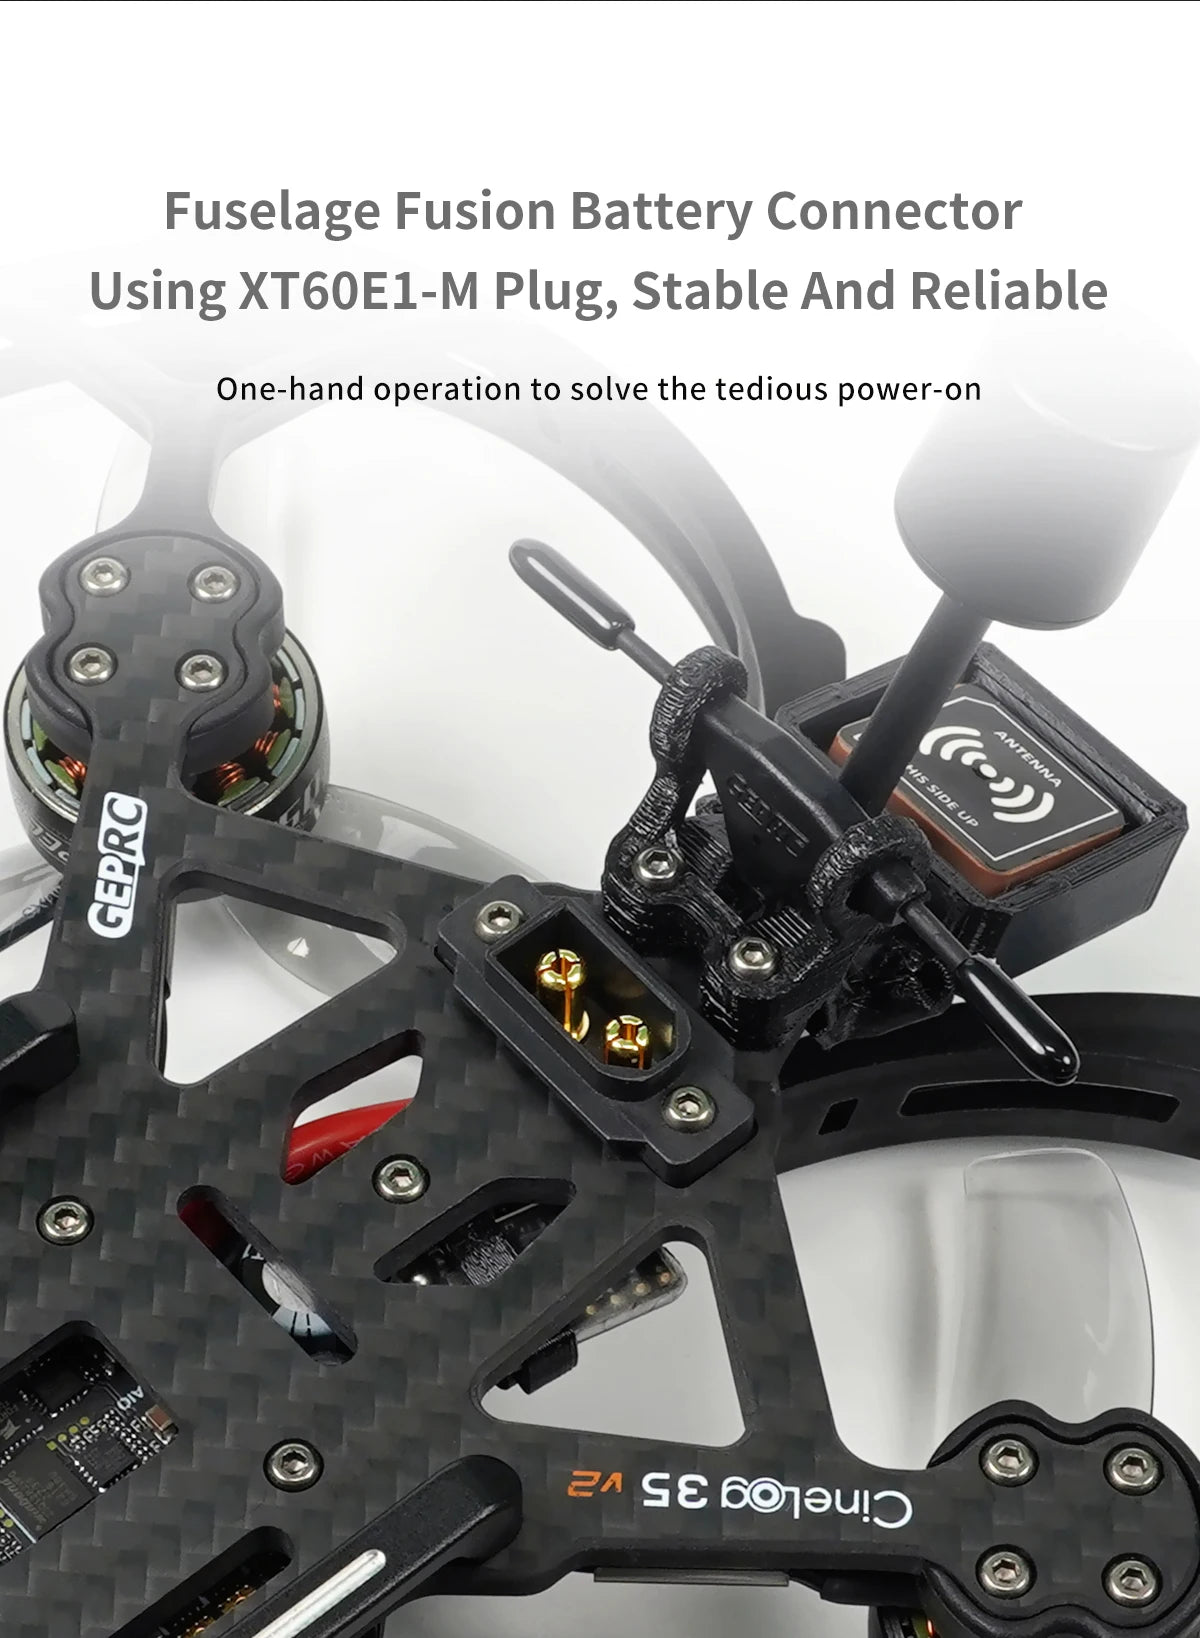 GEPRC CineLog35 V2 HD - O3 GPS FPV, GEPRC CineLog35 V2 HD, Fusion Battery Connector Using XTGOE1-M Plug, Stable And Re